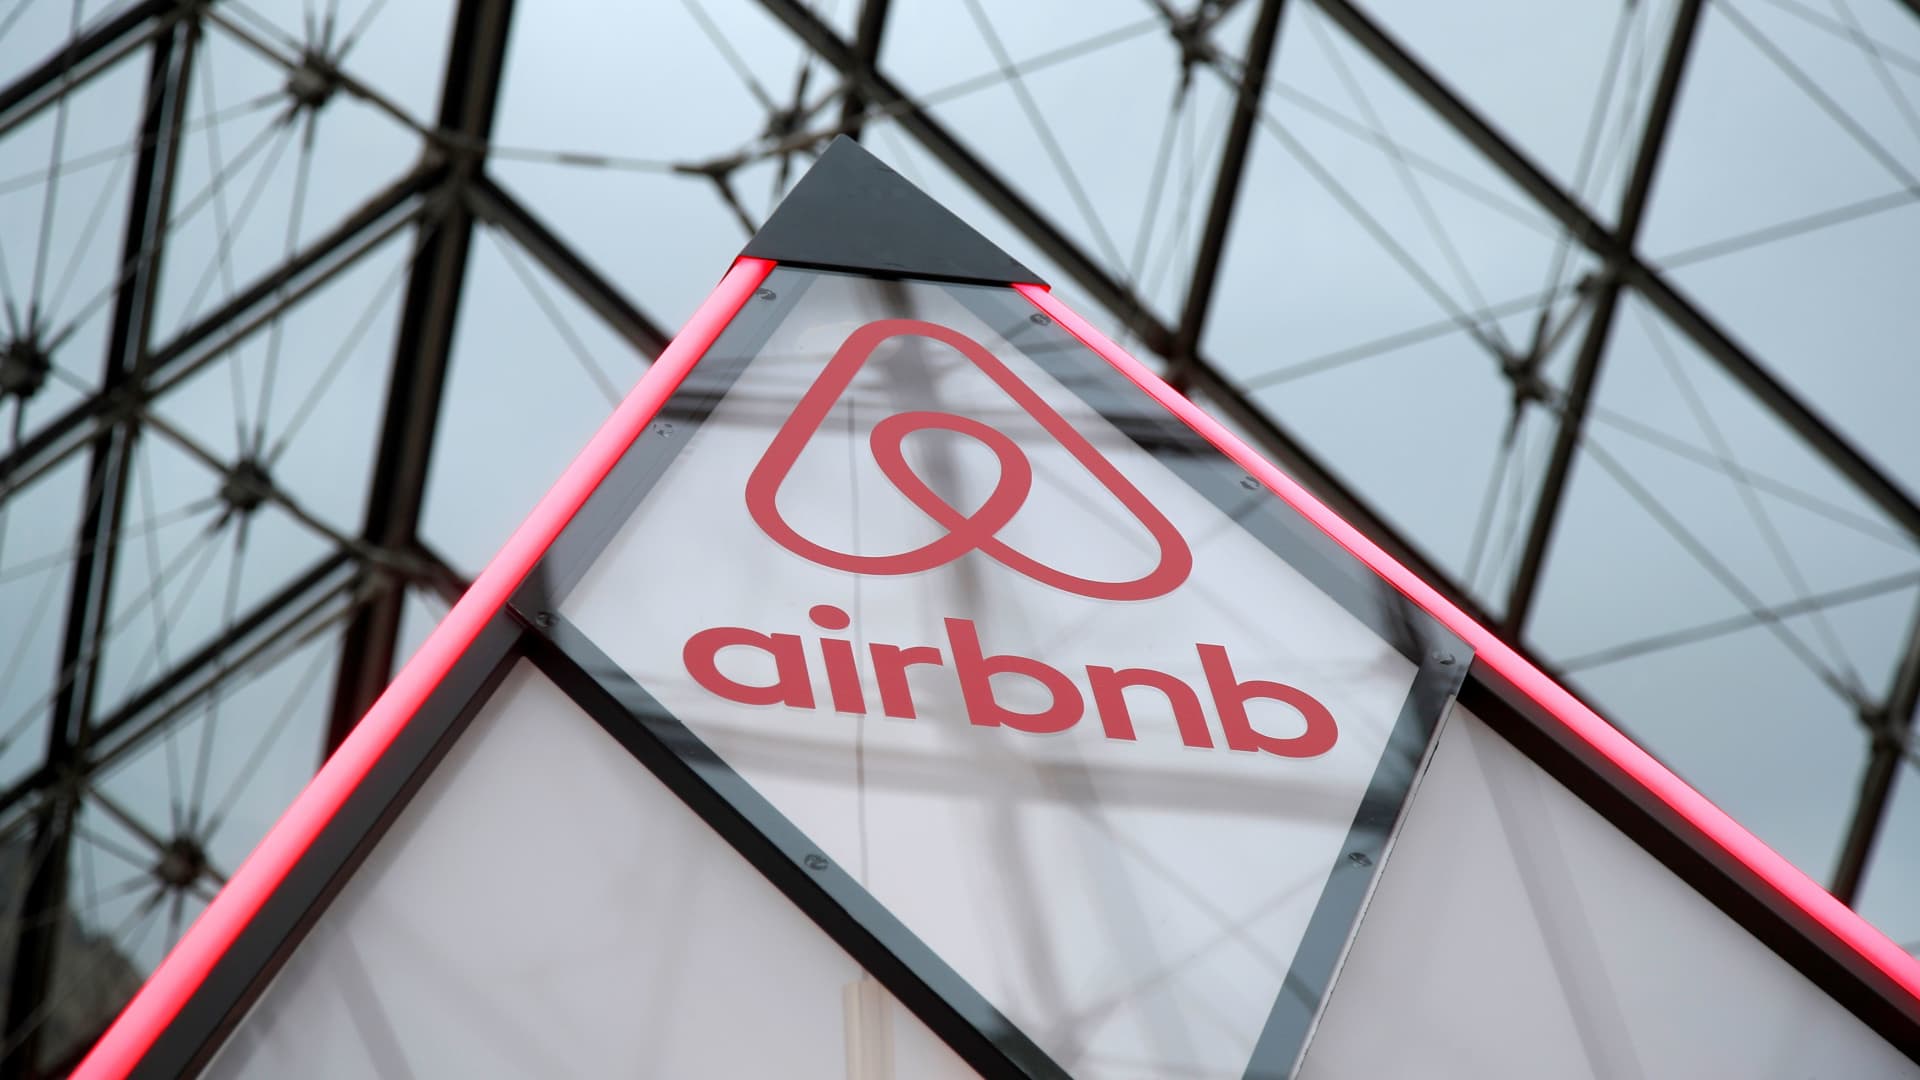 Airbnb launches platform allowing renters to host apartments, partnering with major landlords - CNBC